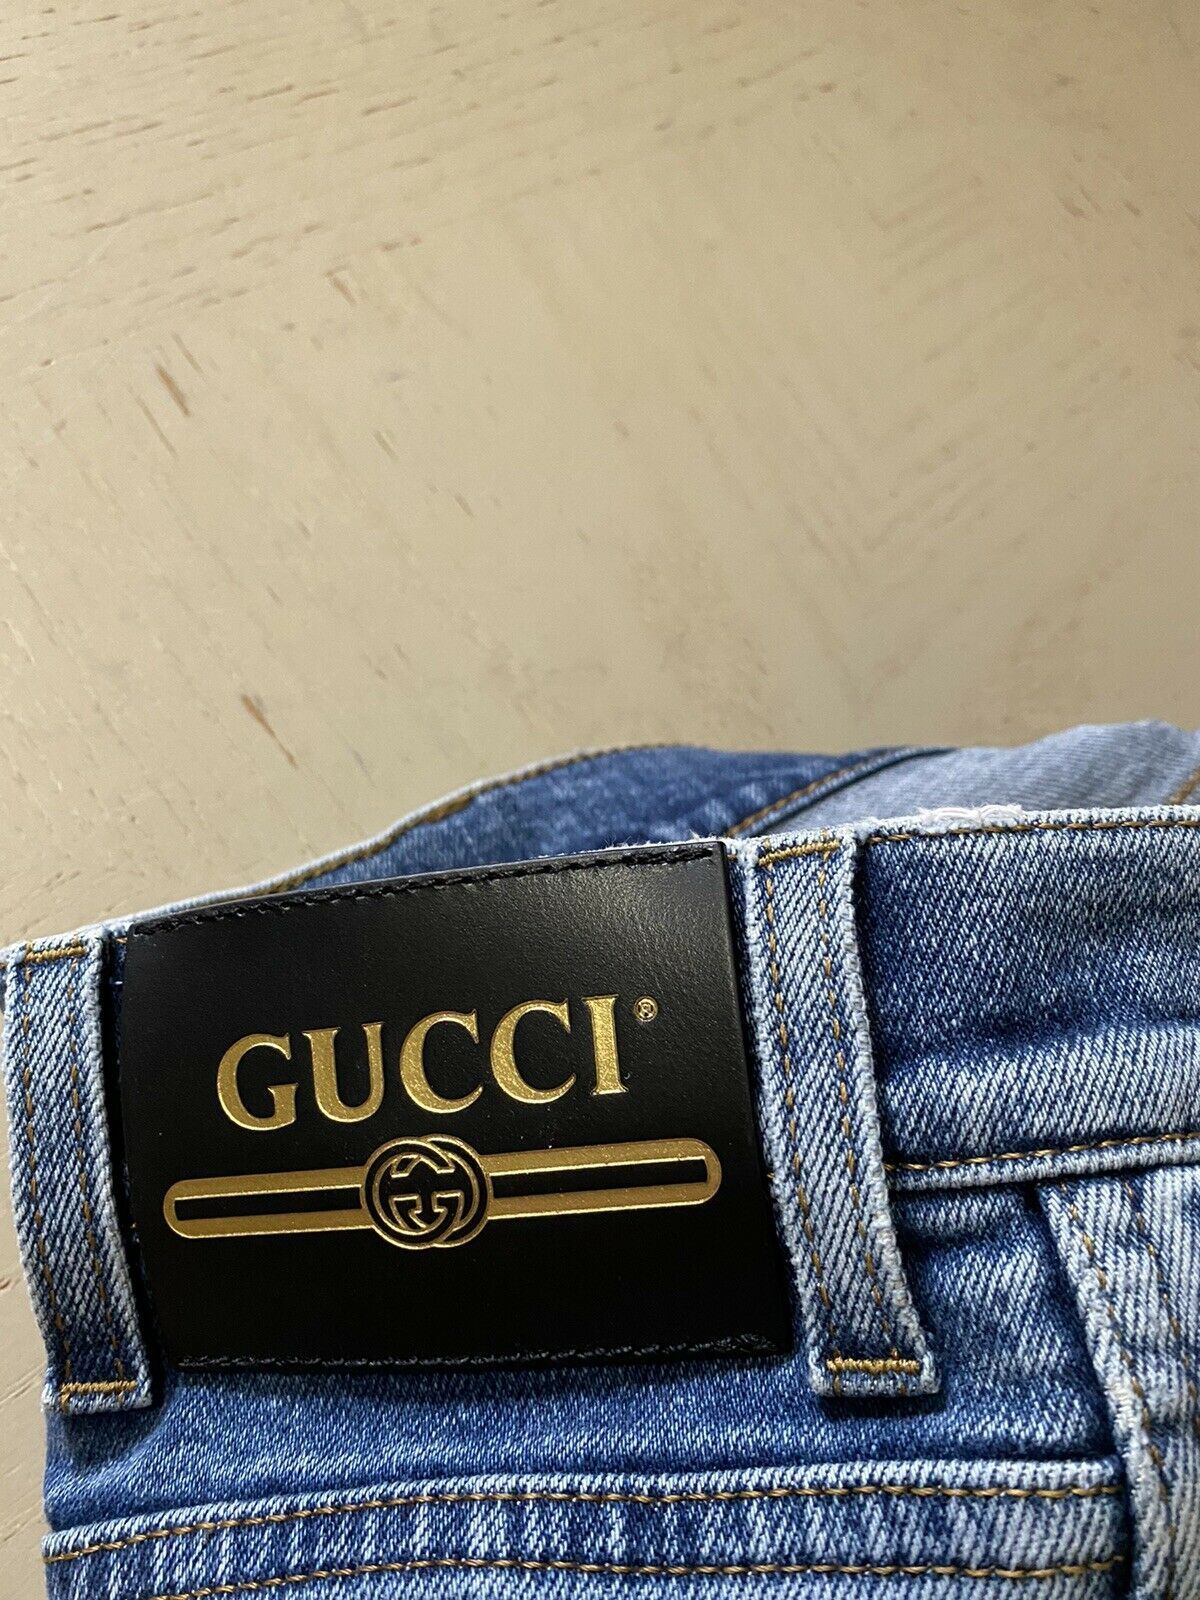 NWT $1200 Gucci Men’s Jeans Pants Slim Fit Blue 36 US ( 52 Euro ) Italy